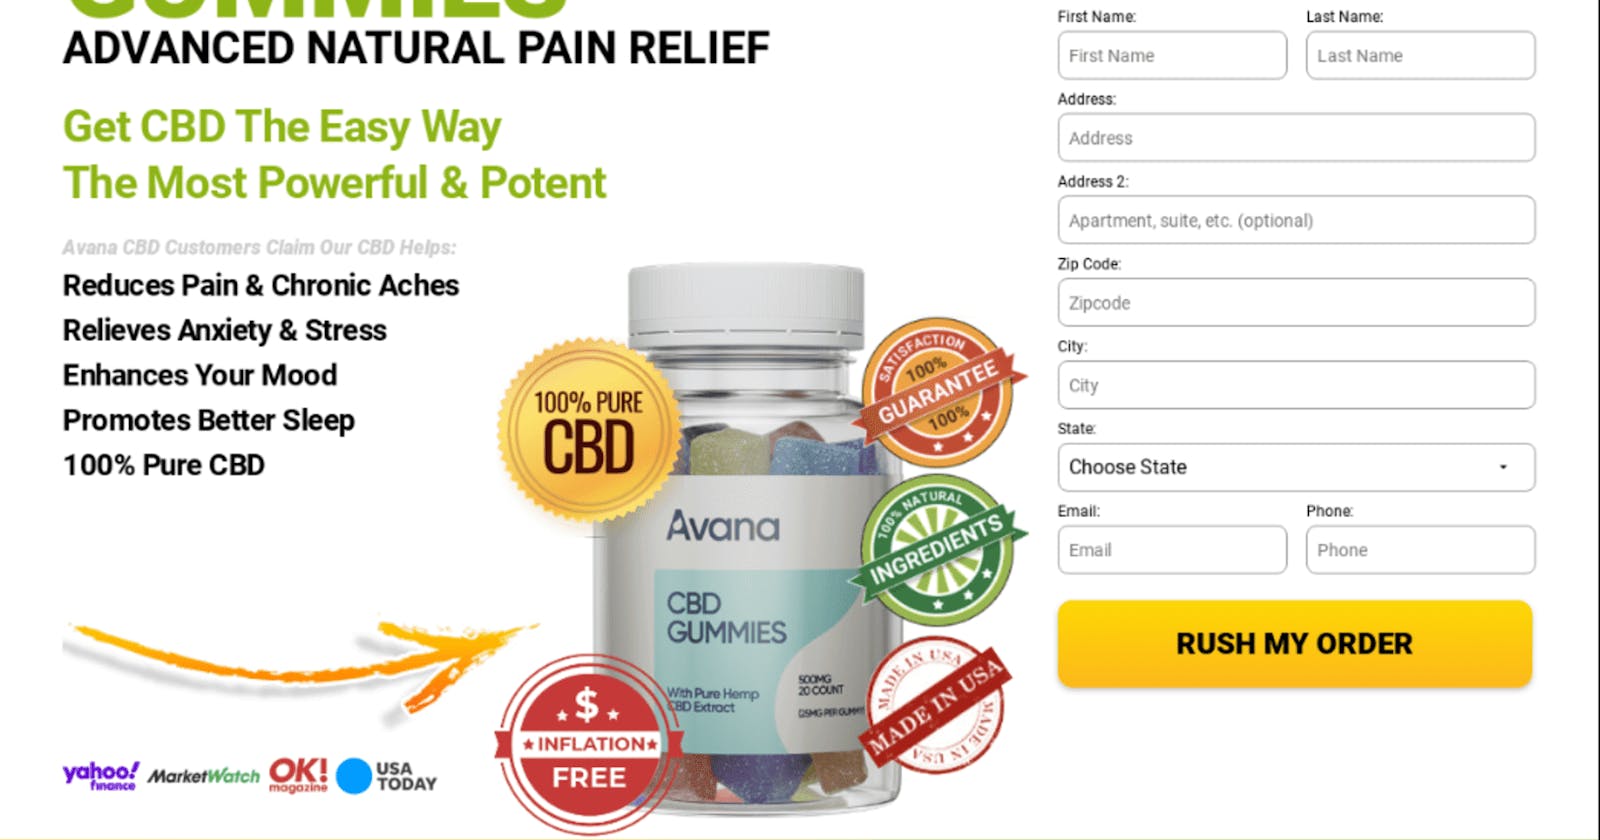 Avana CBD Gummies ReviewsDangerousNegative SIDE EFFECTS, BENEFITS, AND PRICE FOR SALE!?